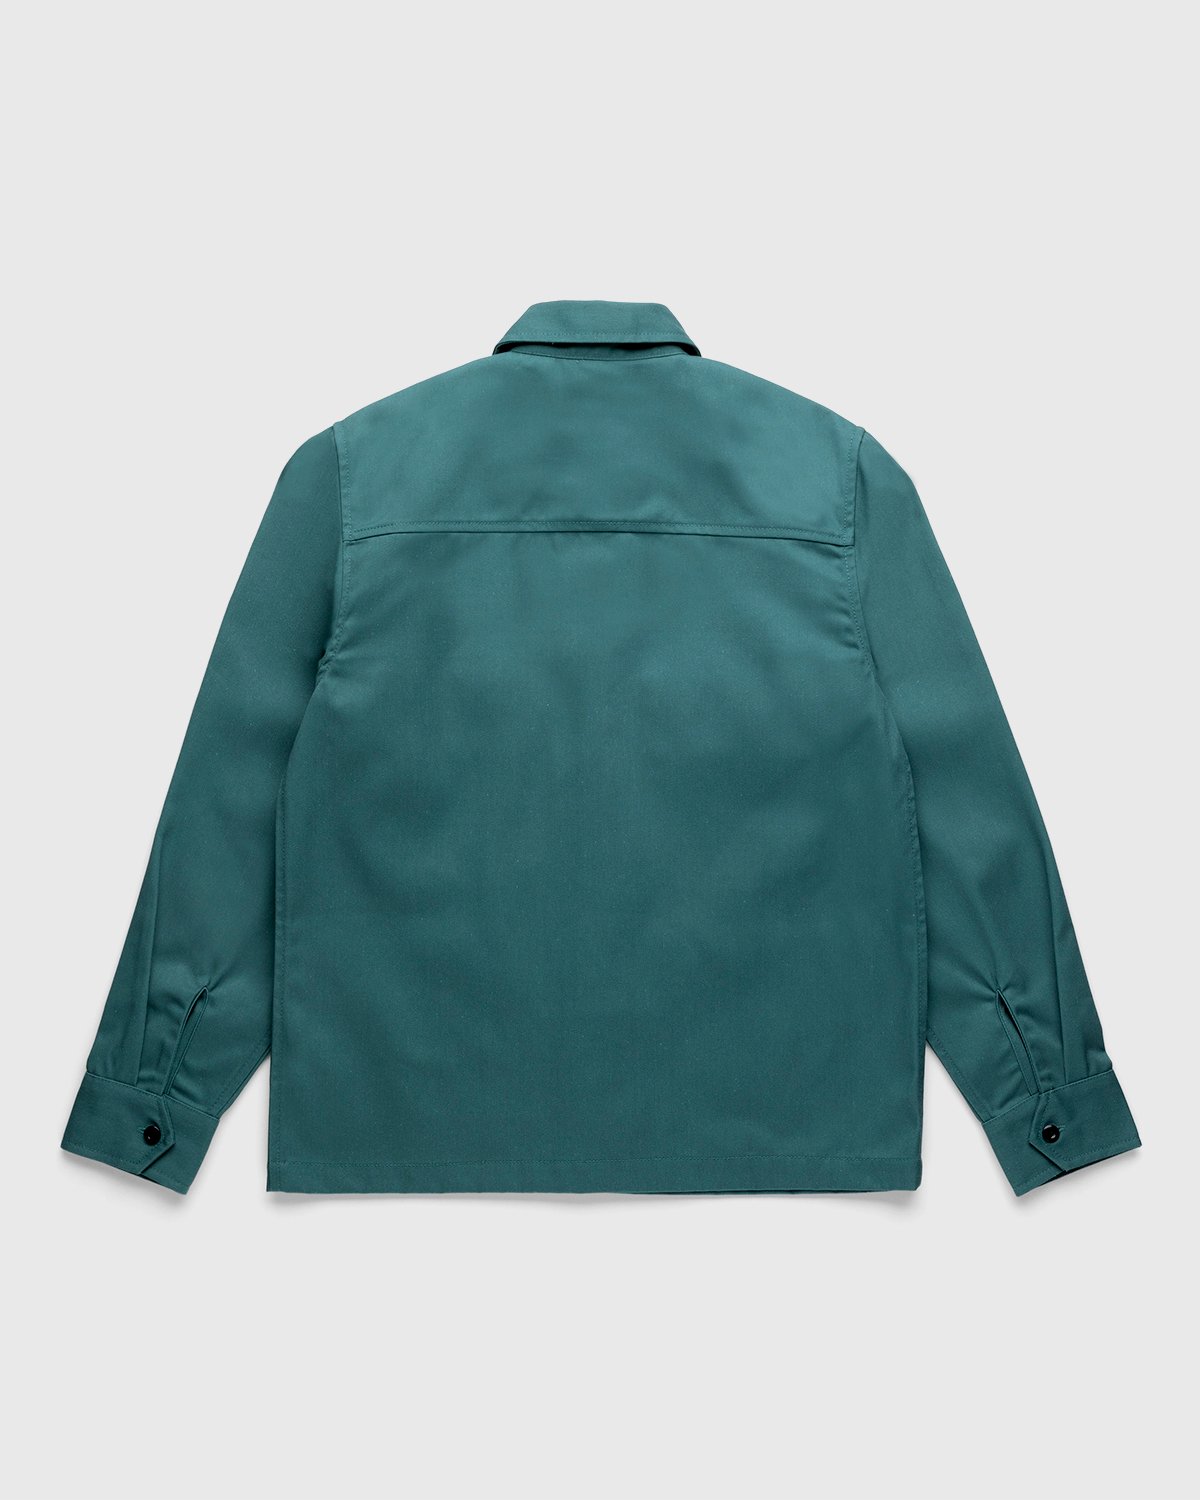 Highsnobiety x Dickies - Service Shirt Lincoln Green - Clothing - Green - Image 2